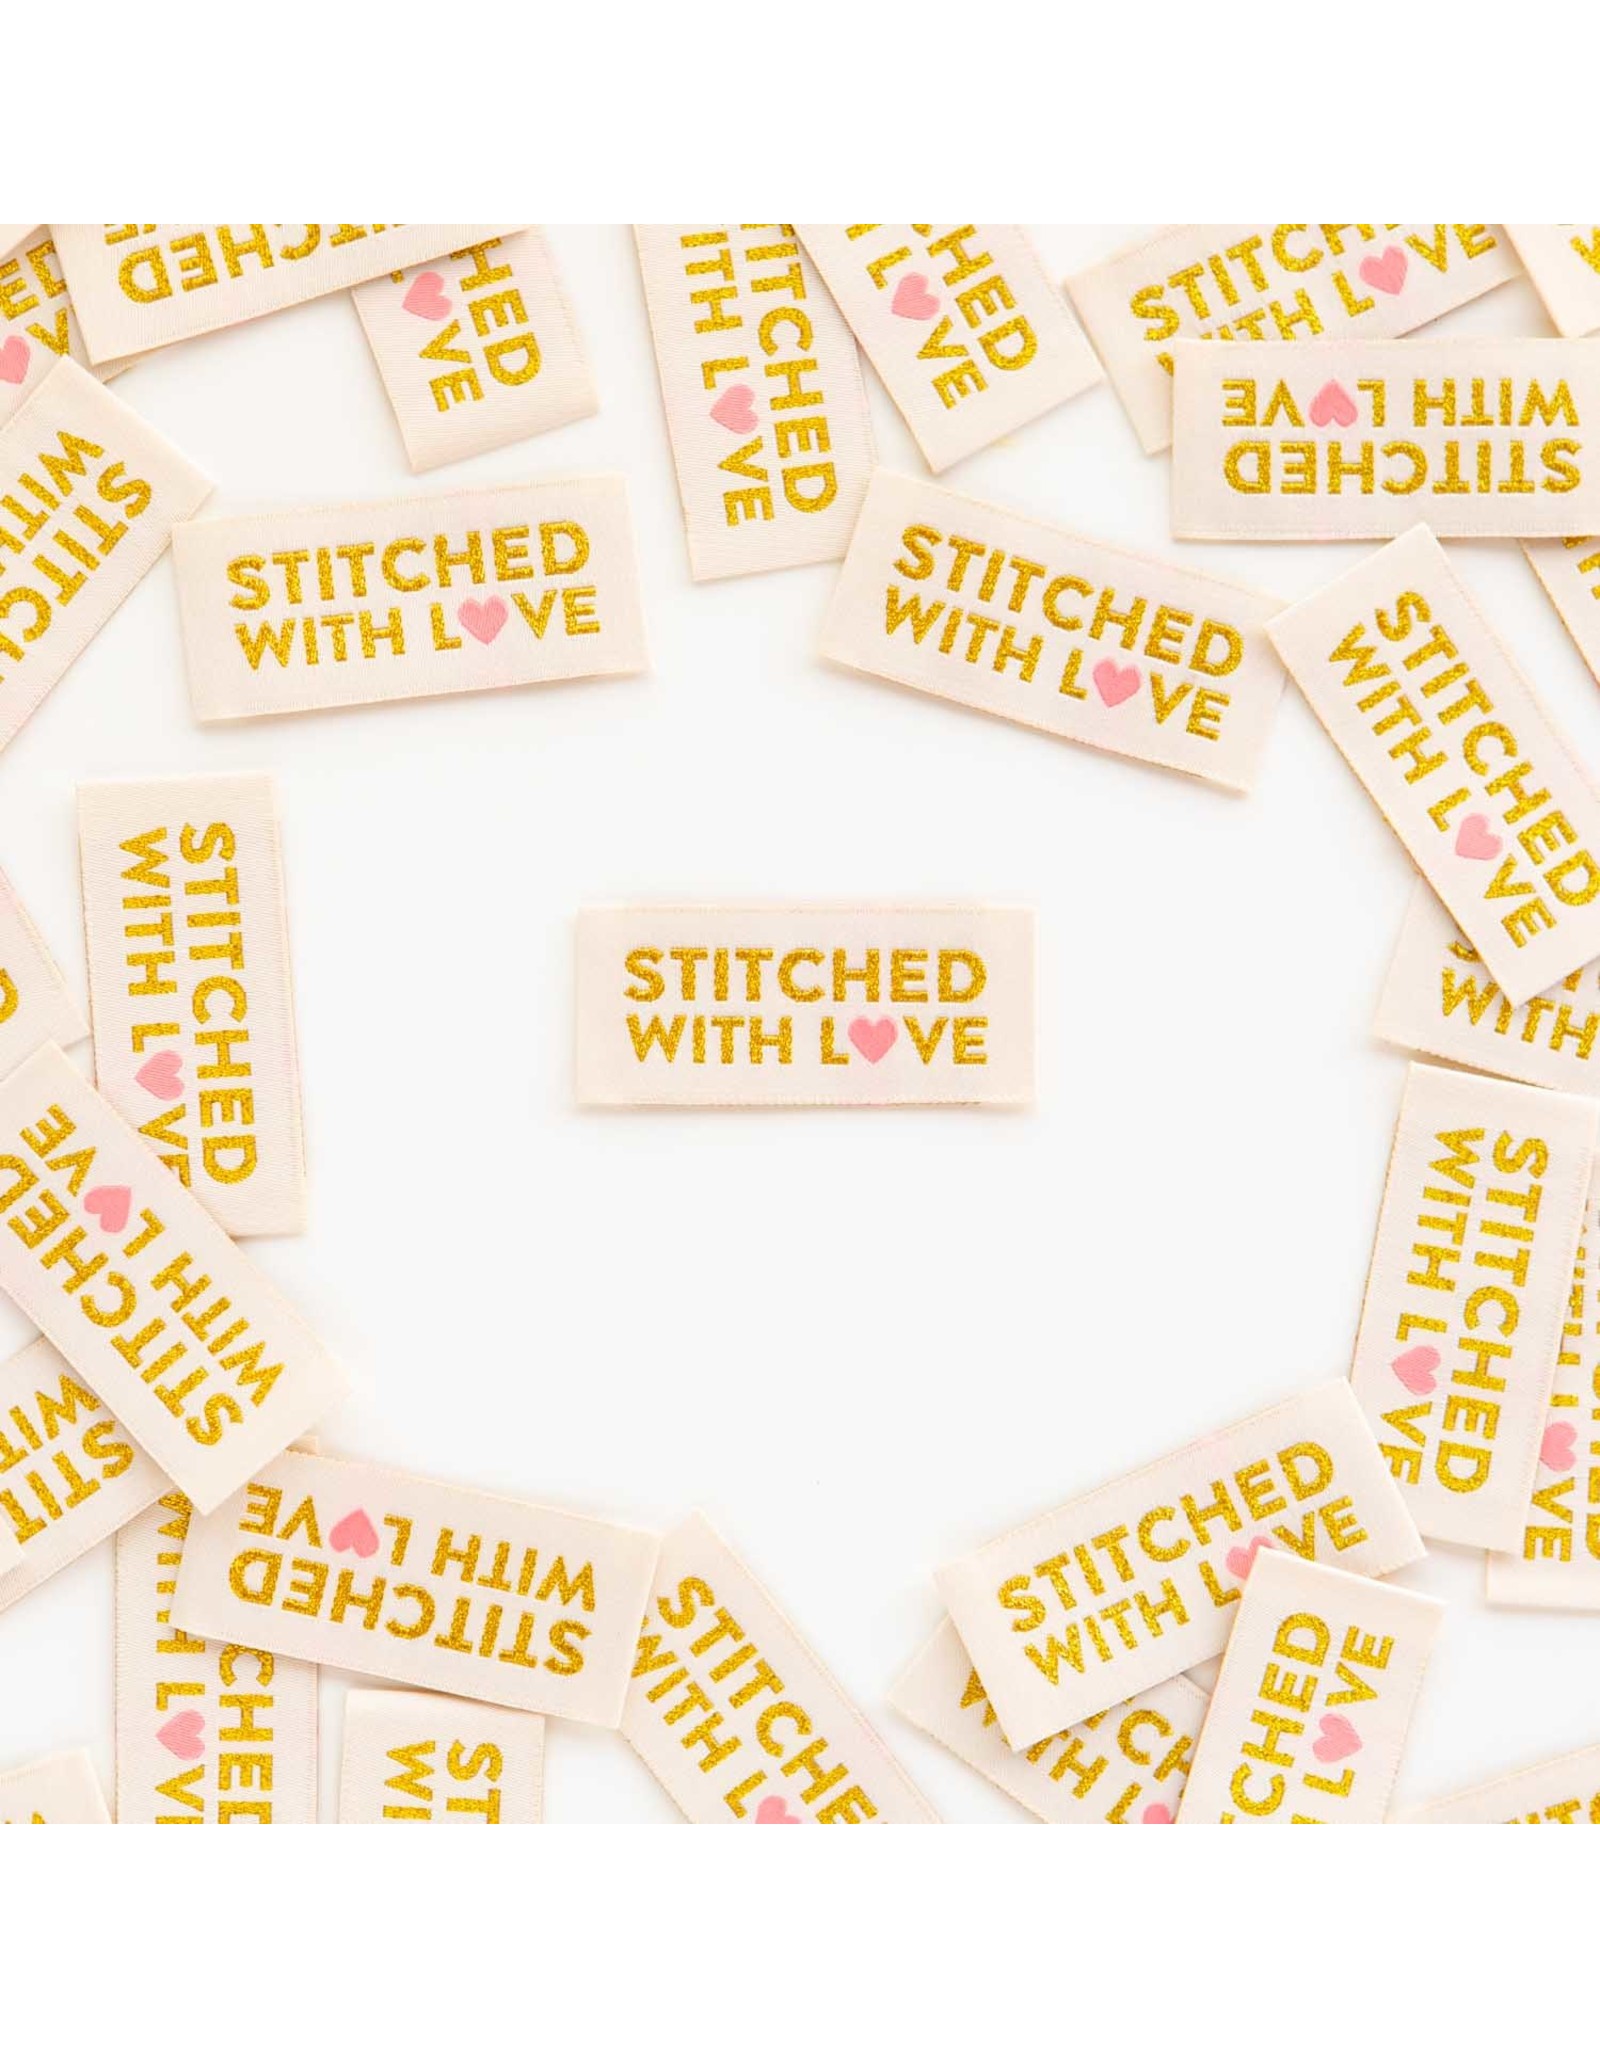 Sarah Hearts Stitched with Love - Woven Label Tags, Set of 8